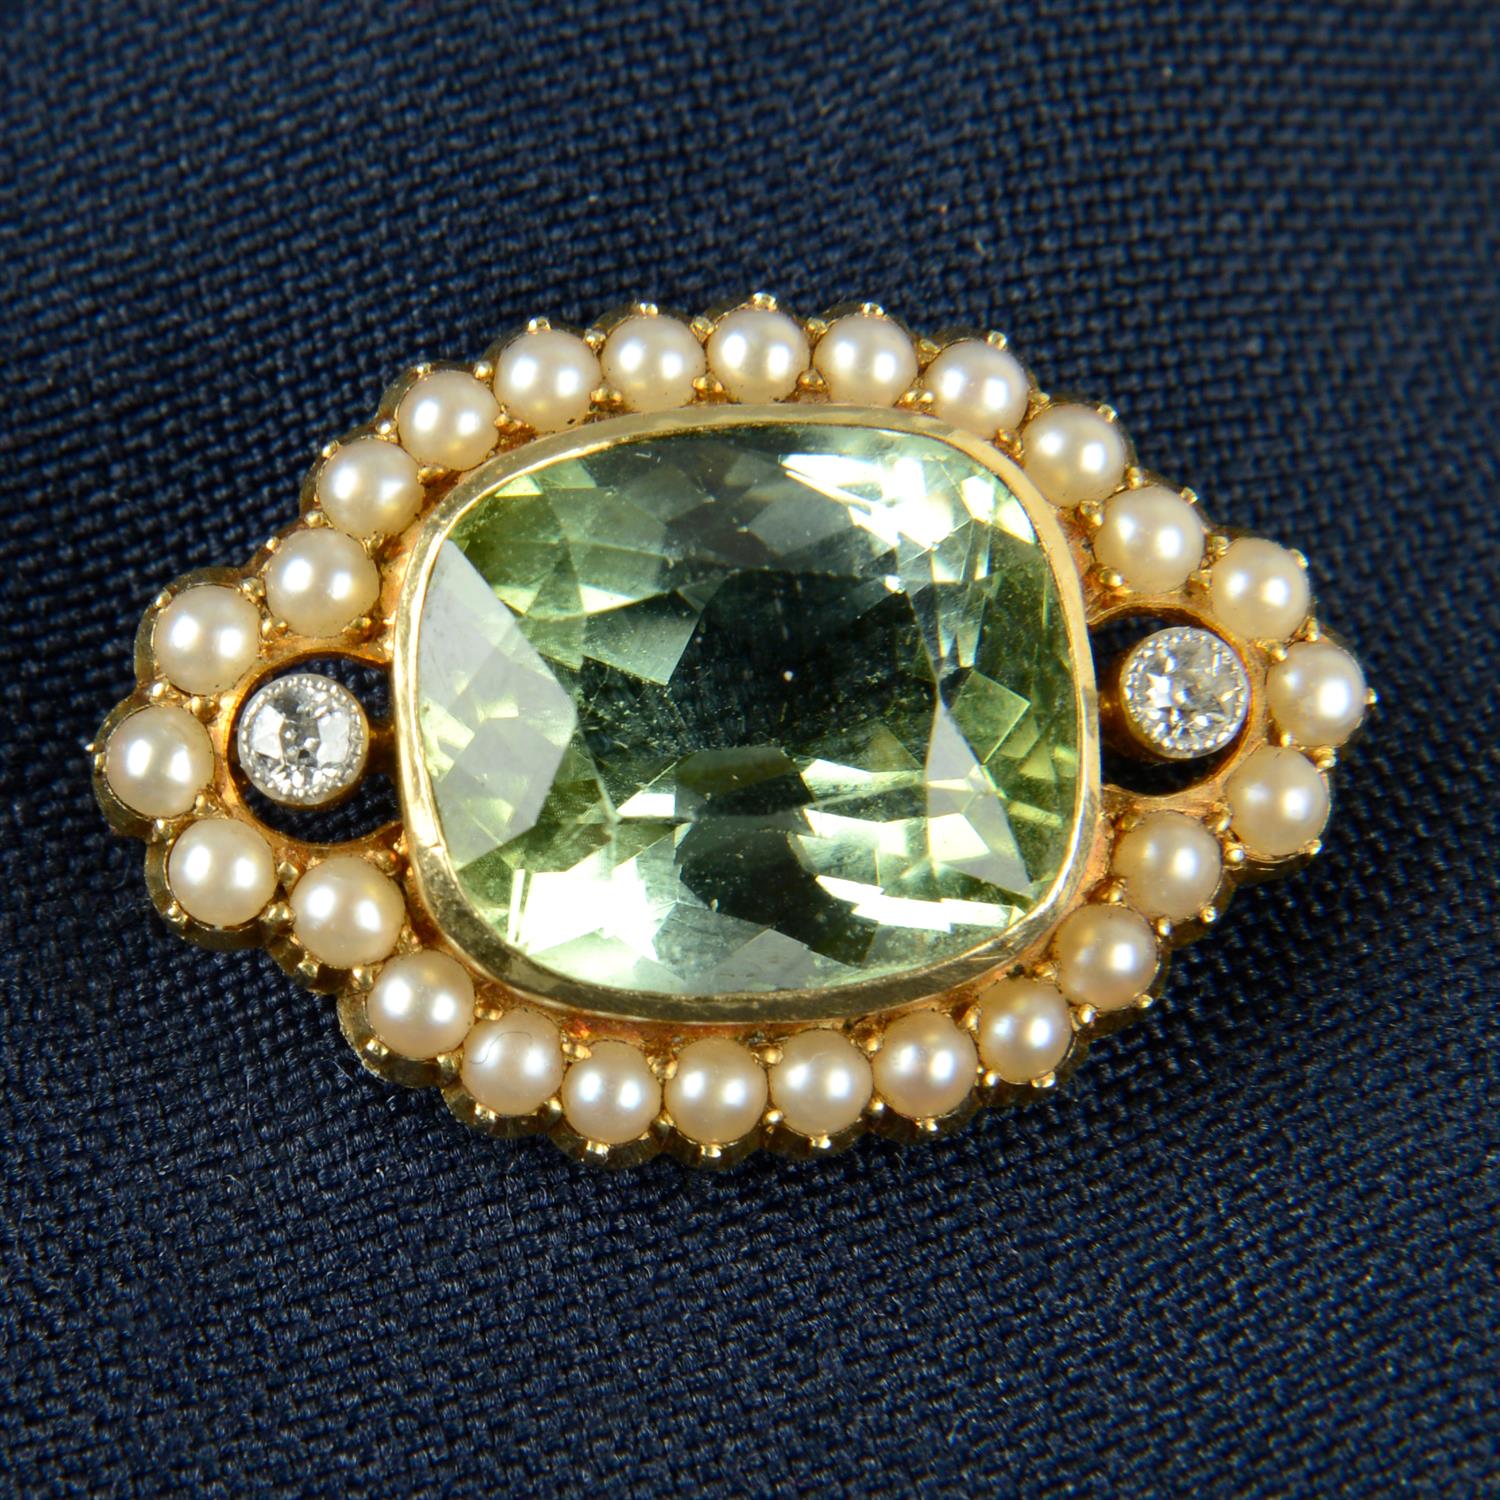 A late 19th century gold green tourmaline brooch, with split pearl and old-cut diamond surround.